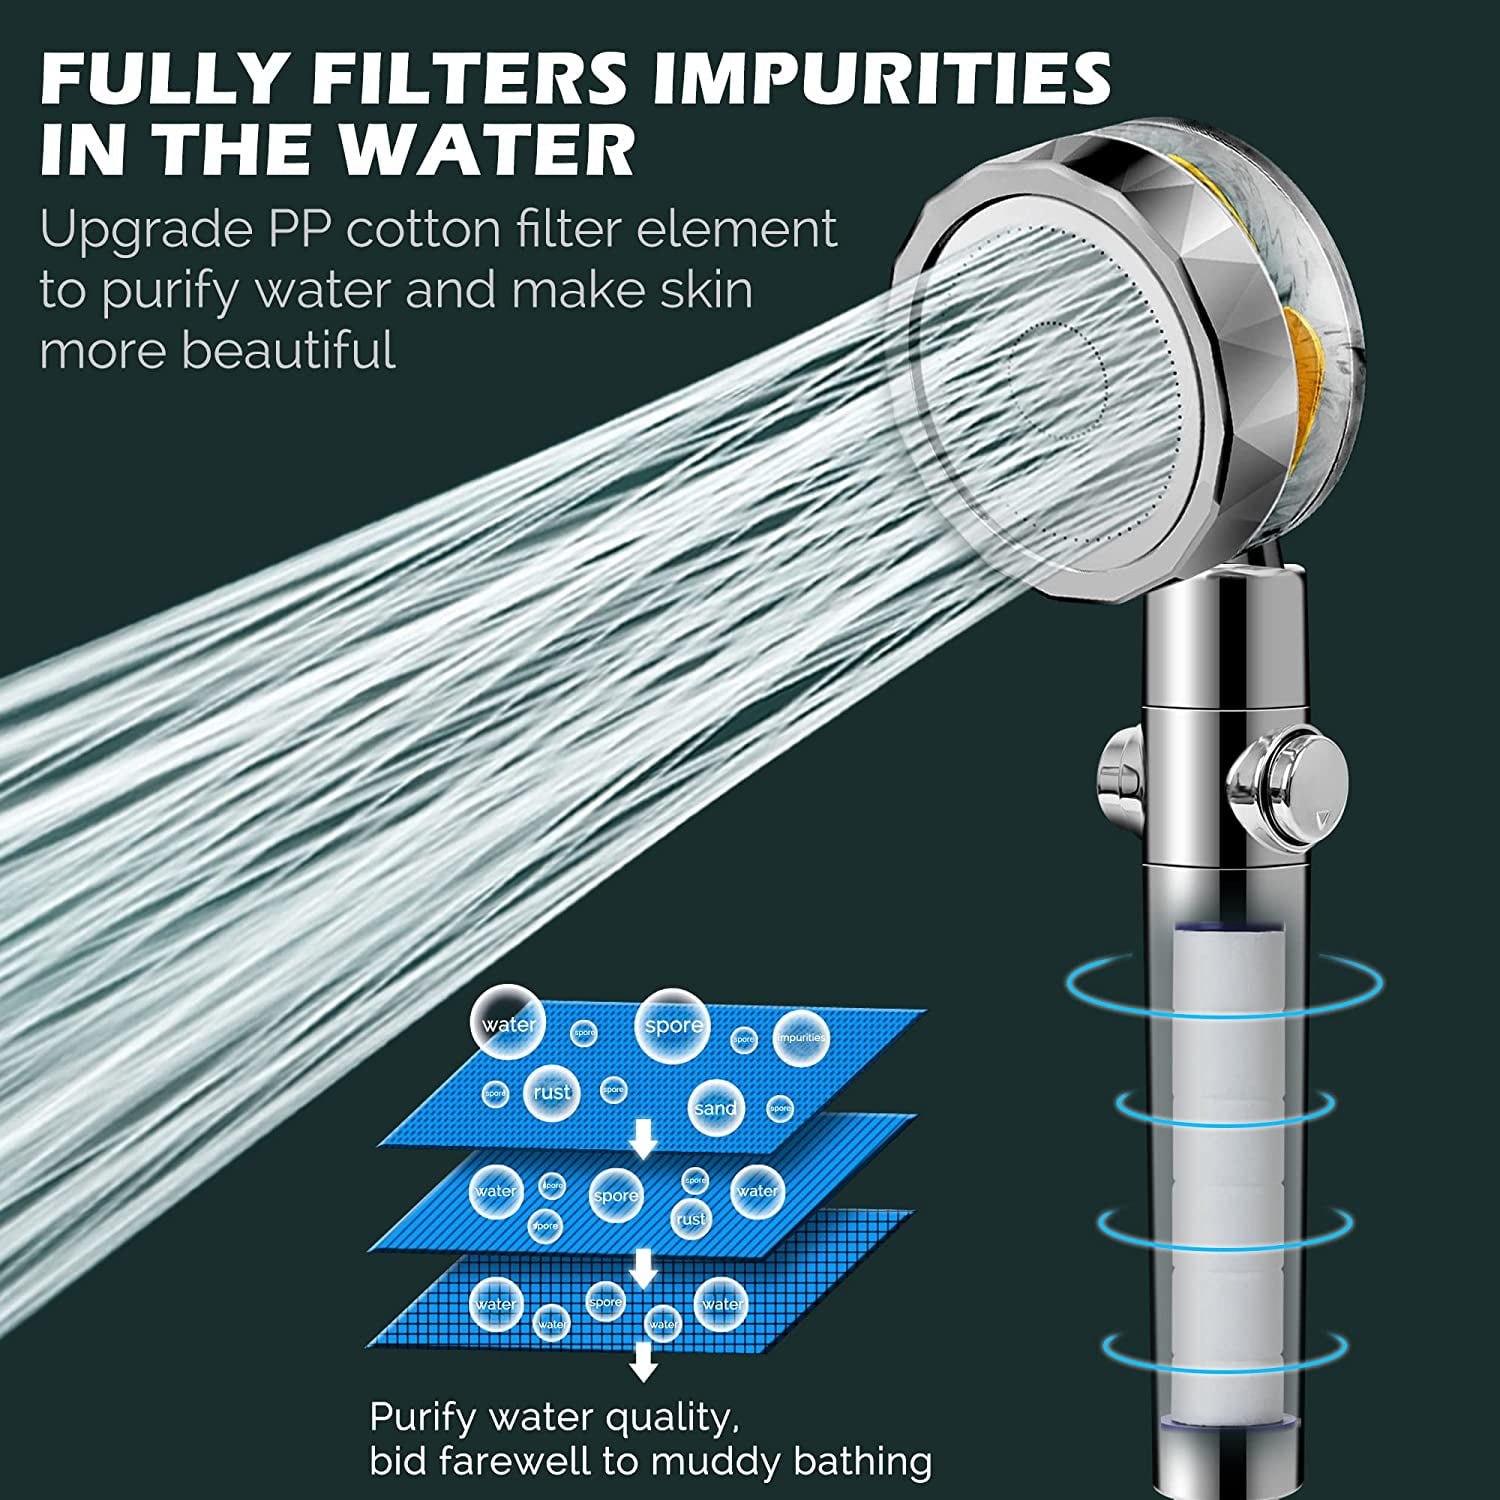 The Fan Vortex Turbo Spa Shower Head Hydro Jet Power Showered Head Handheld Turbocharged Blue Propeller Driven Shower Head with Filter High Pressure Shower Head for Water Saving 